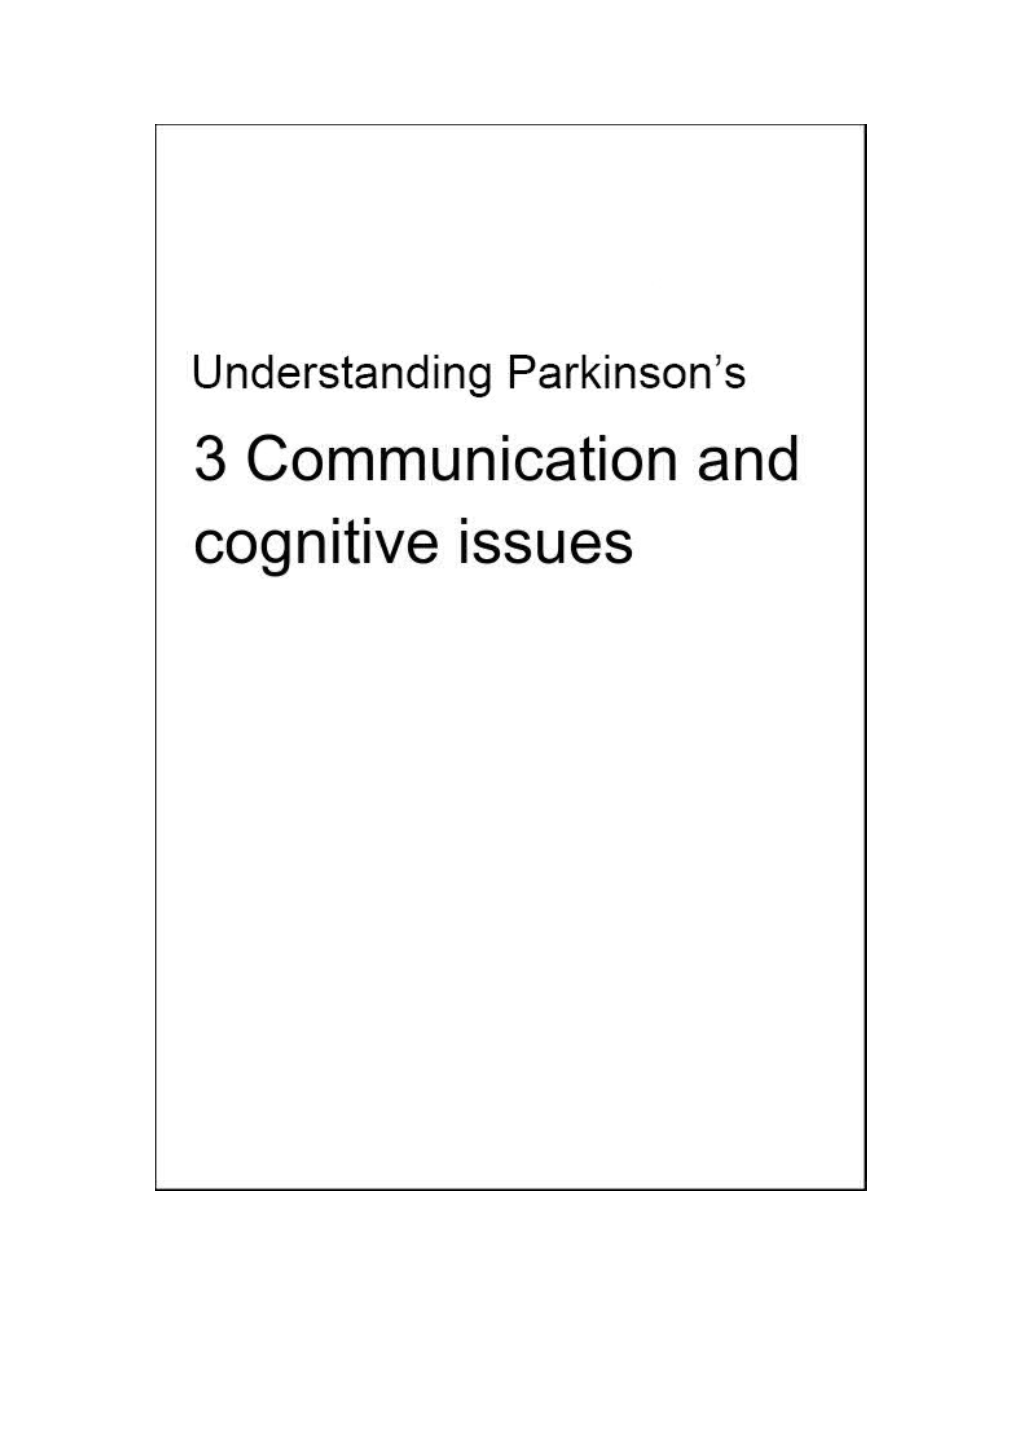 3 Communication and Cognitive Issues